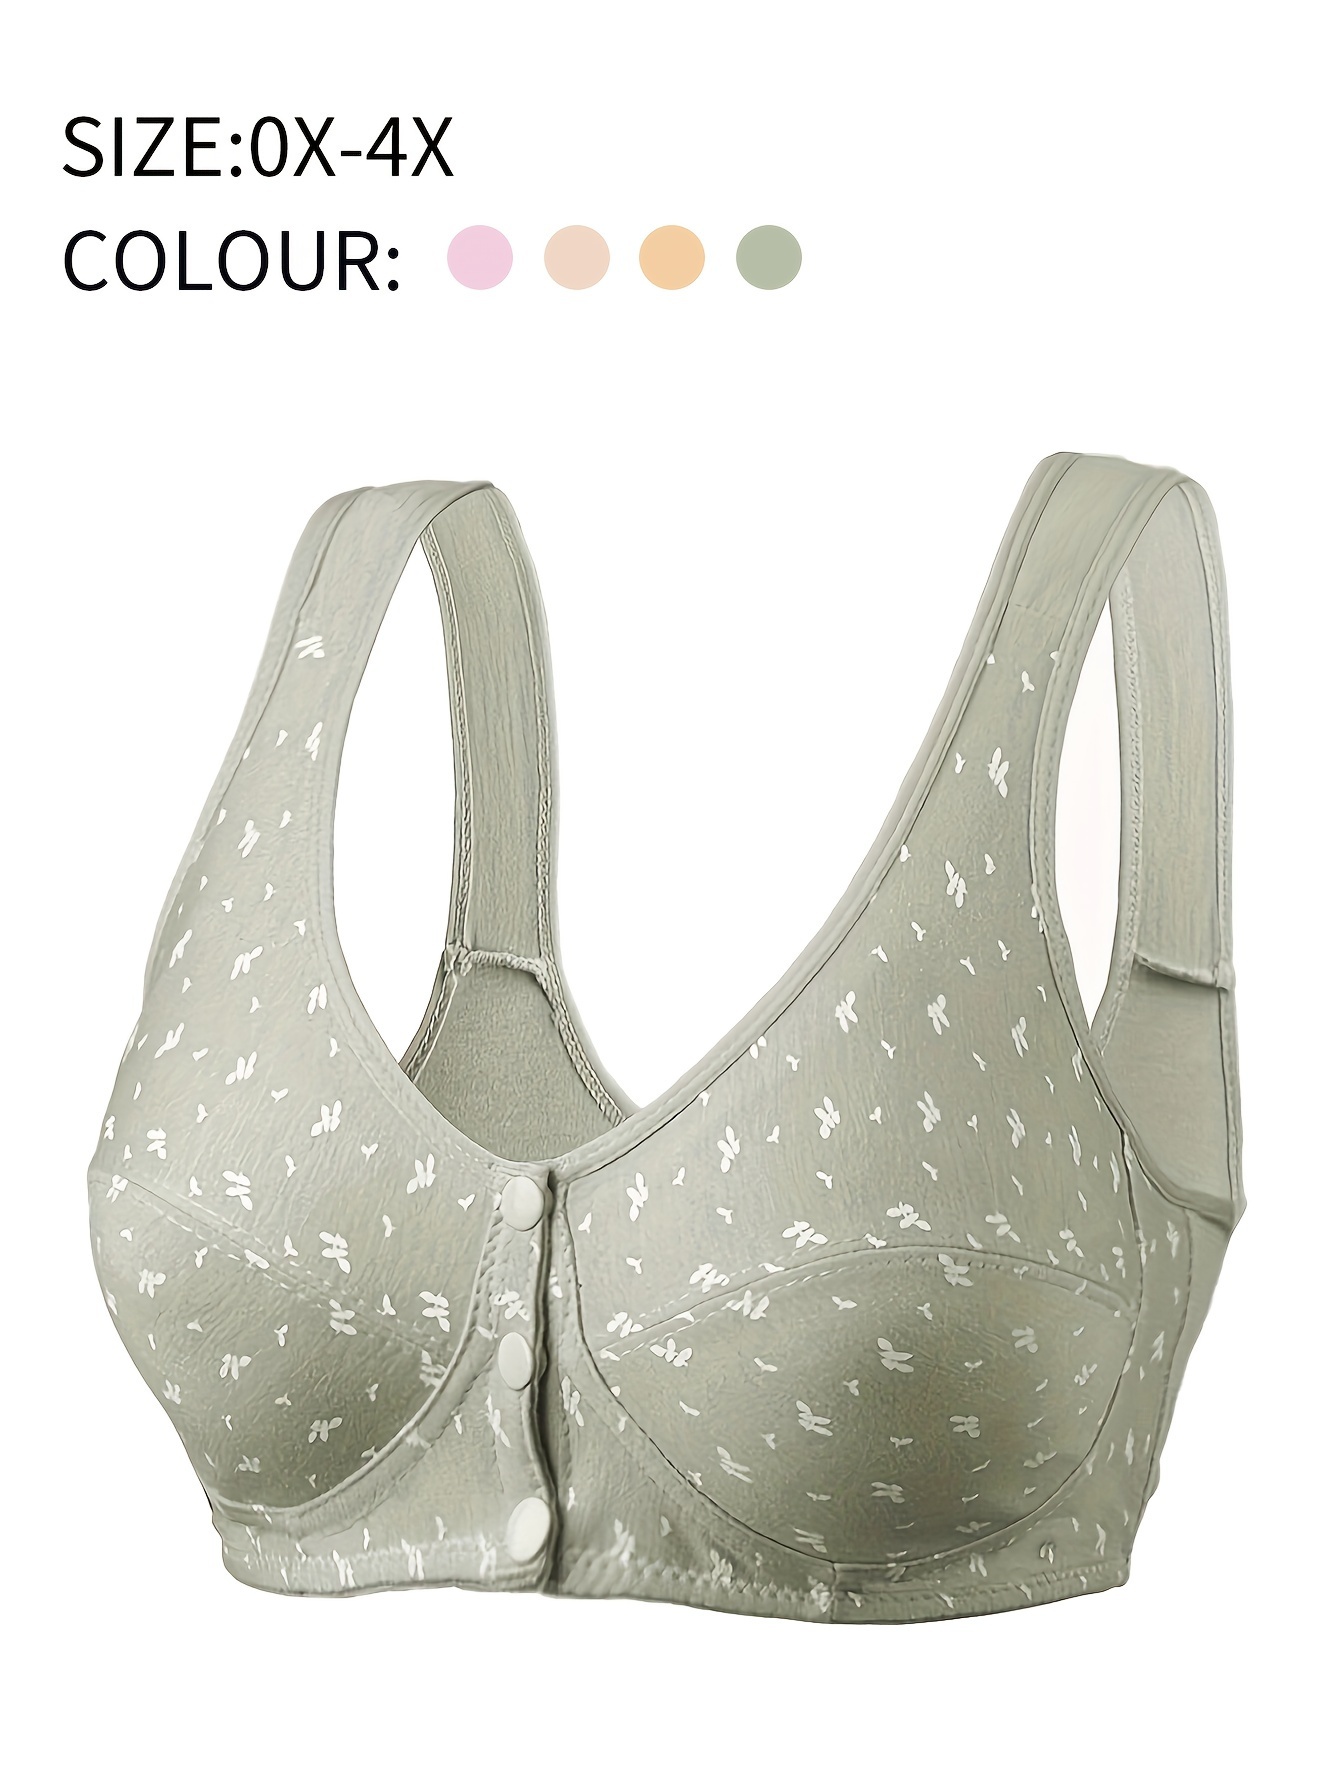 Bra 2 Pieces Daisy Front Button Breathable Cotton Bra With Front